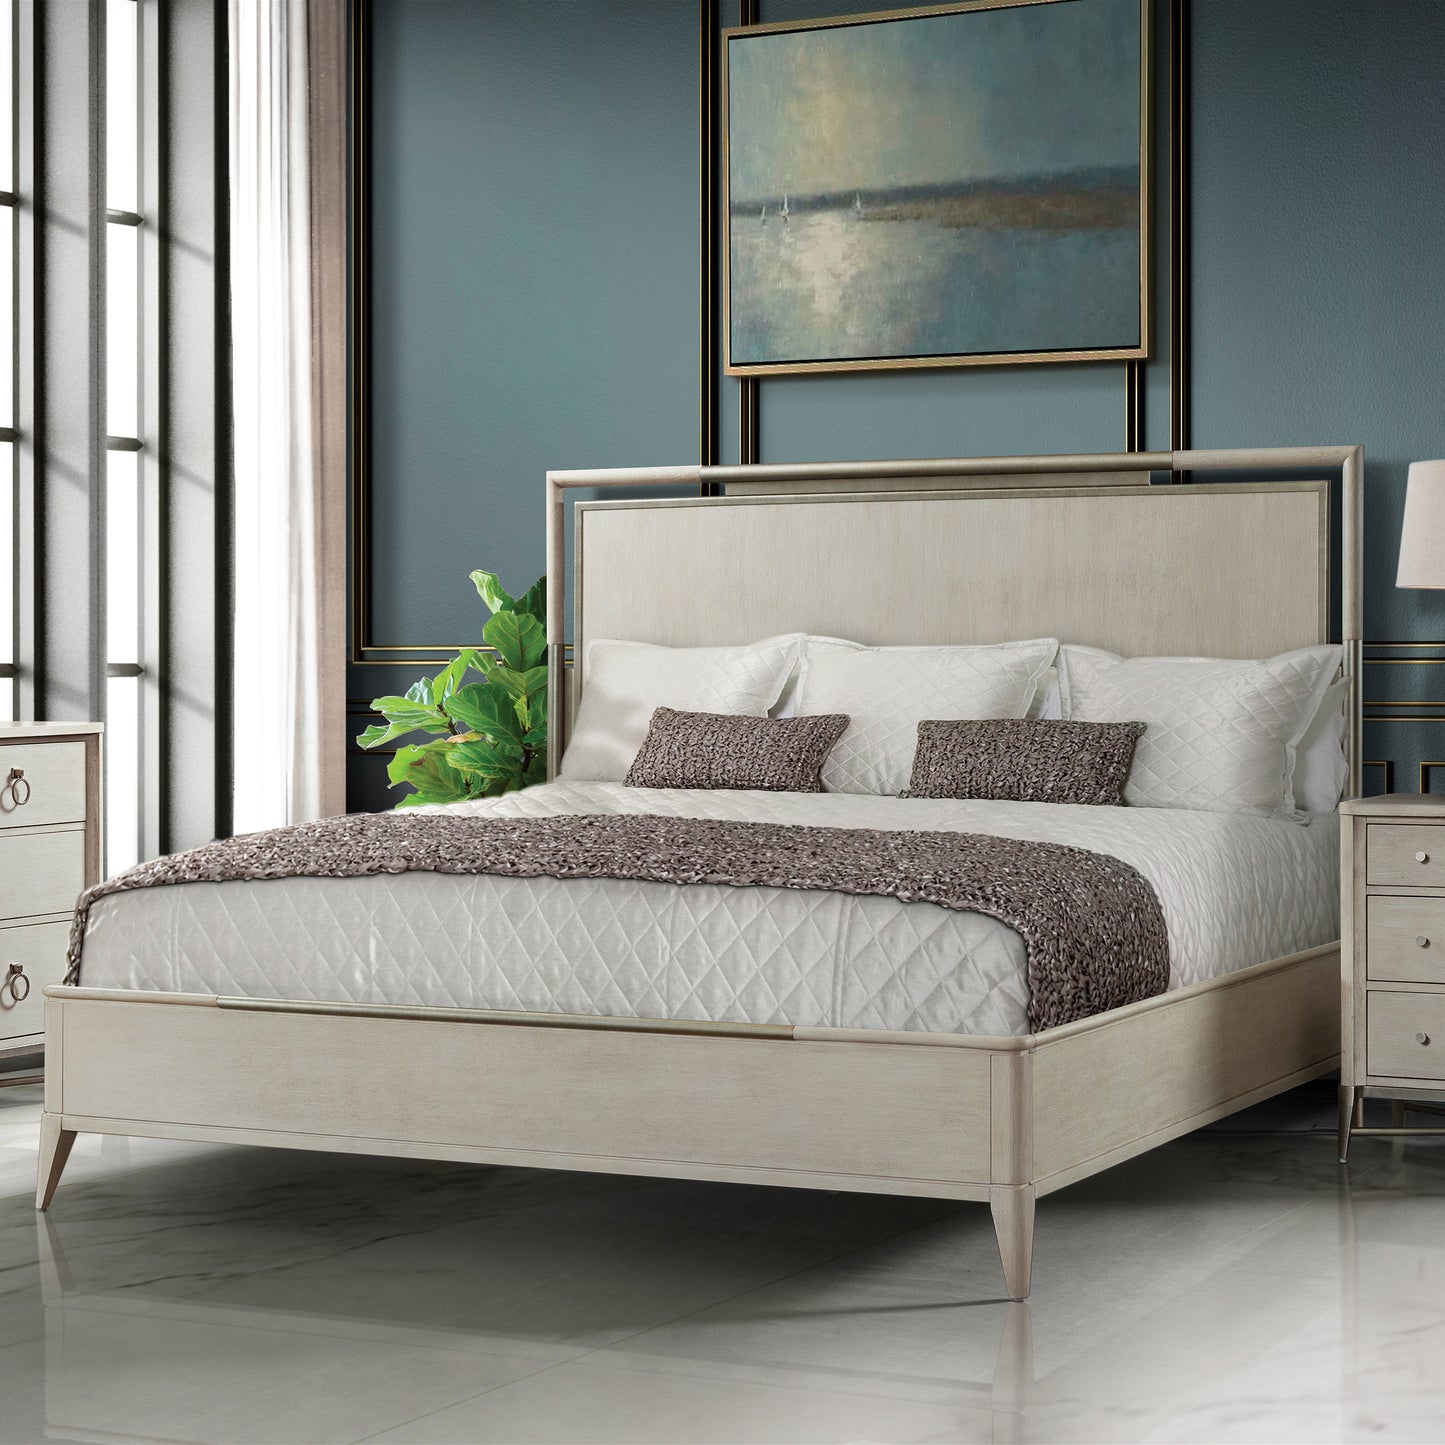 Mantalia Solid Wood Panel Bed with Metal Frame, Champagne